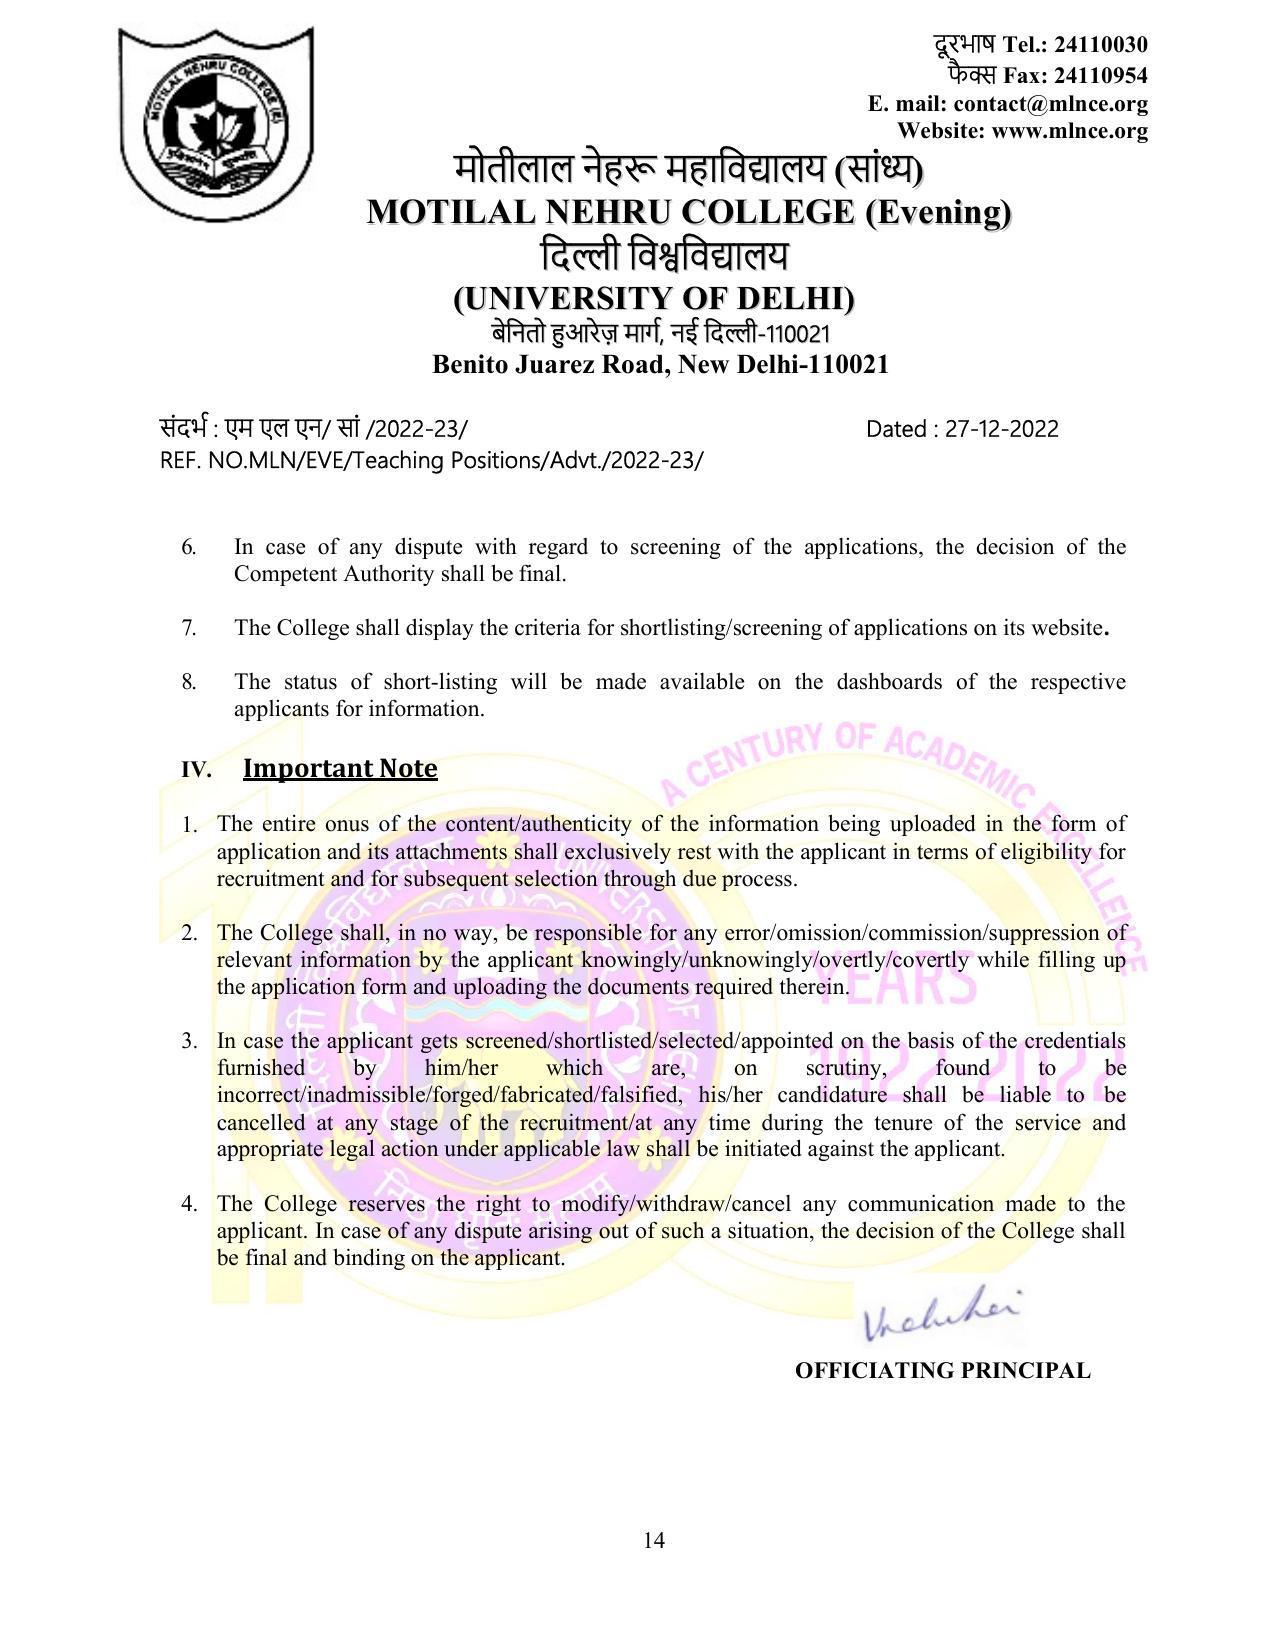 Motilal Nehru College (Evening) Invites Application for 75 Assistant Professor Recruitment 2022 - Page 11